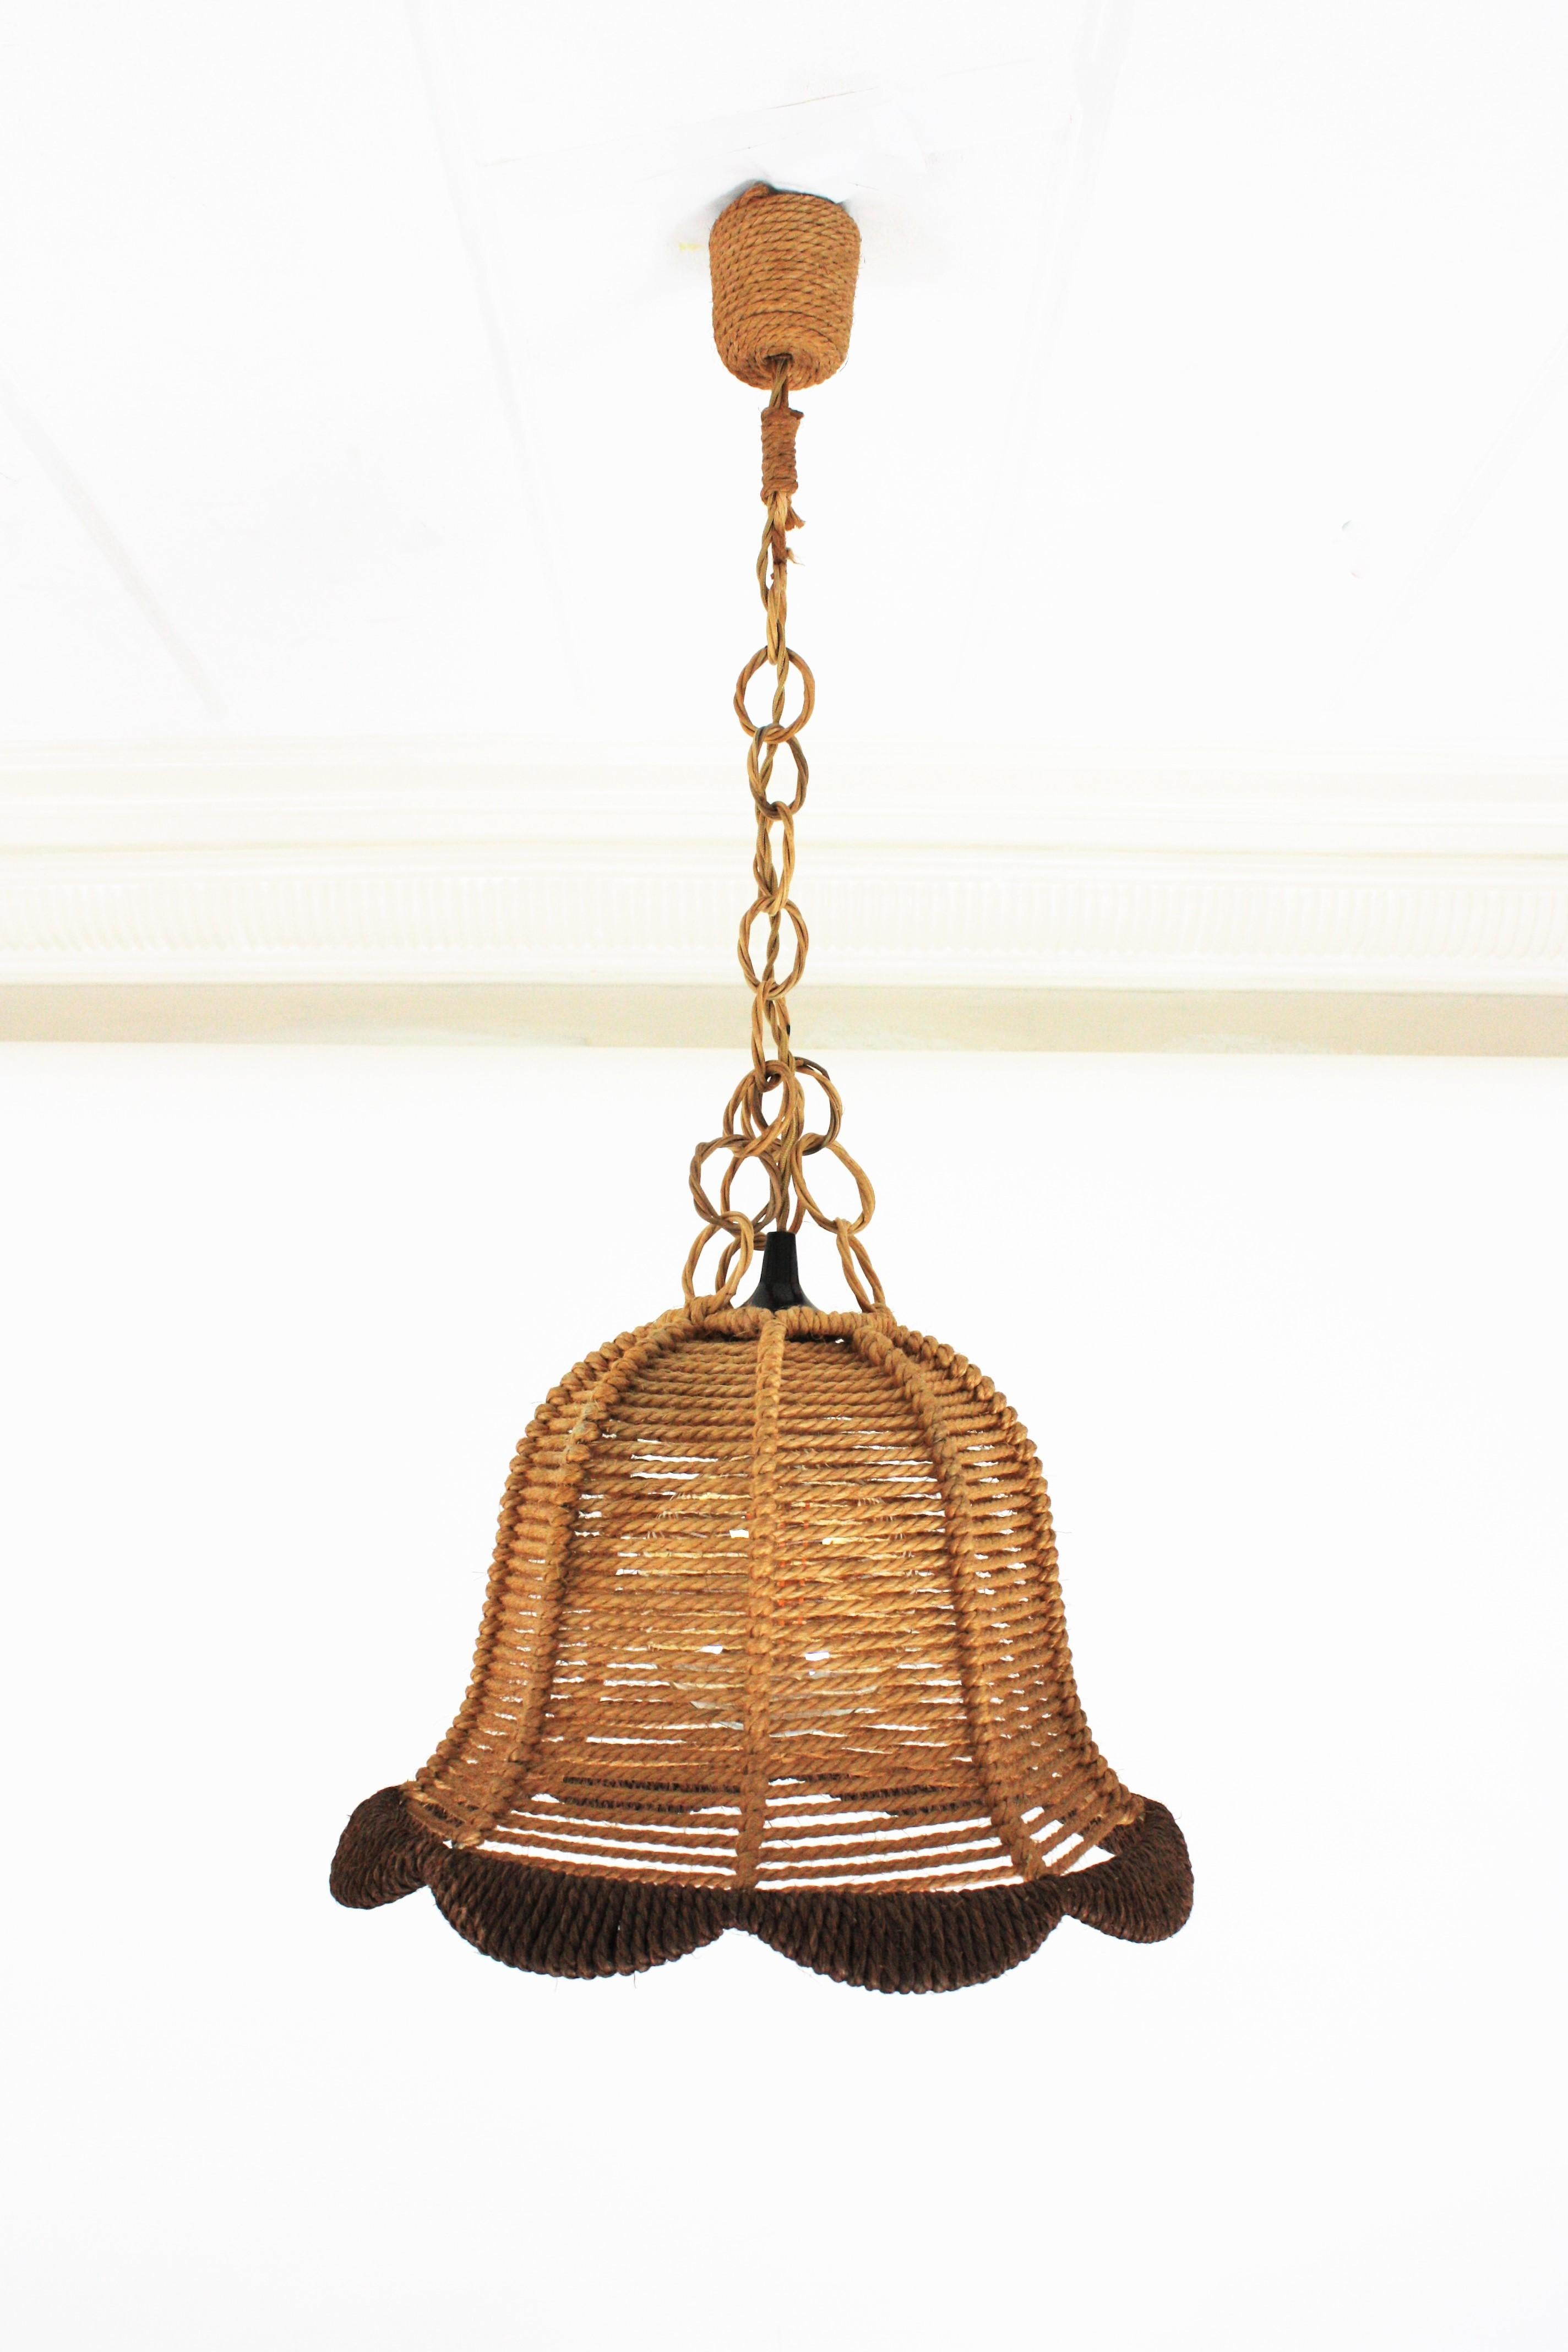 20th Century Rattan and Rope Bell Ceiling Pendant Light Hanging Lamp, Spain, 1960s